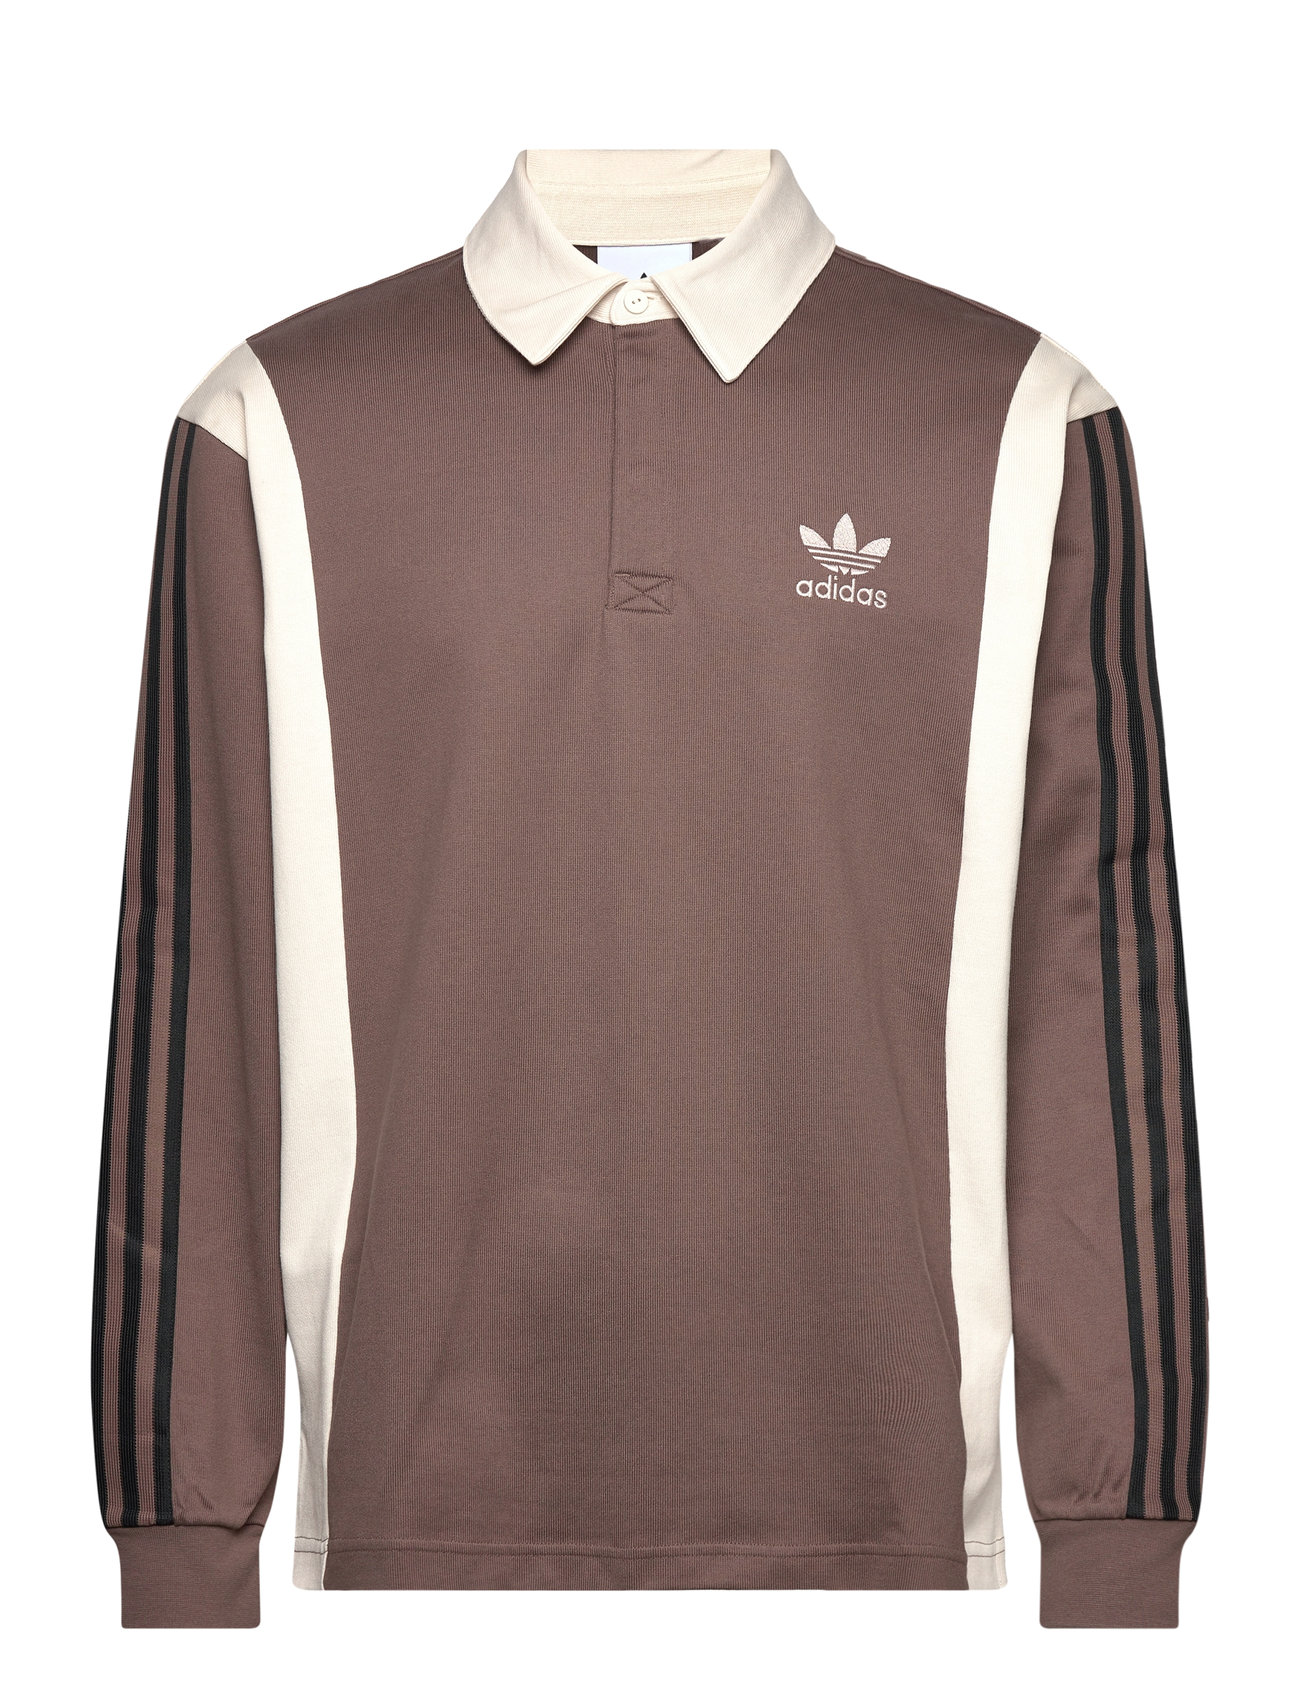 Rugby Shirt Sport Polos Long-sleeved Brown Adidas Originals